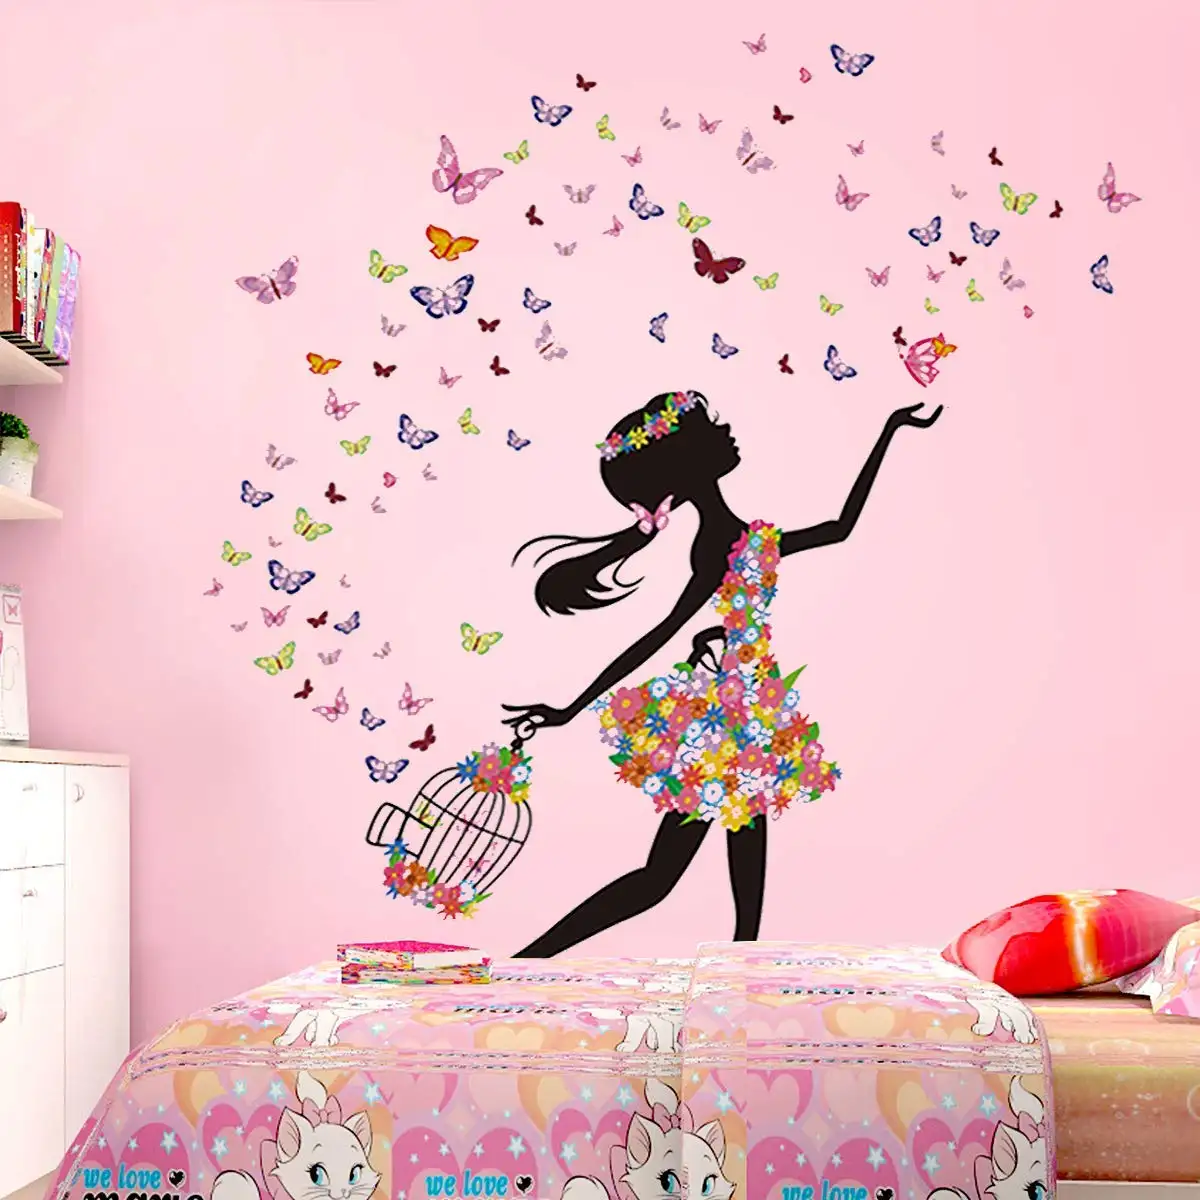 Removeable Beautiful 3D Wall Decals Sticker Nature Flower Waterproof Wall Decals Room Decor Girl Wall Sticker